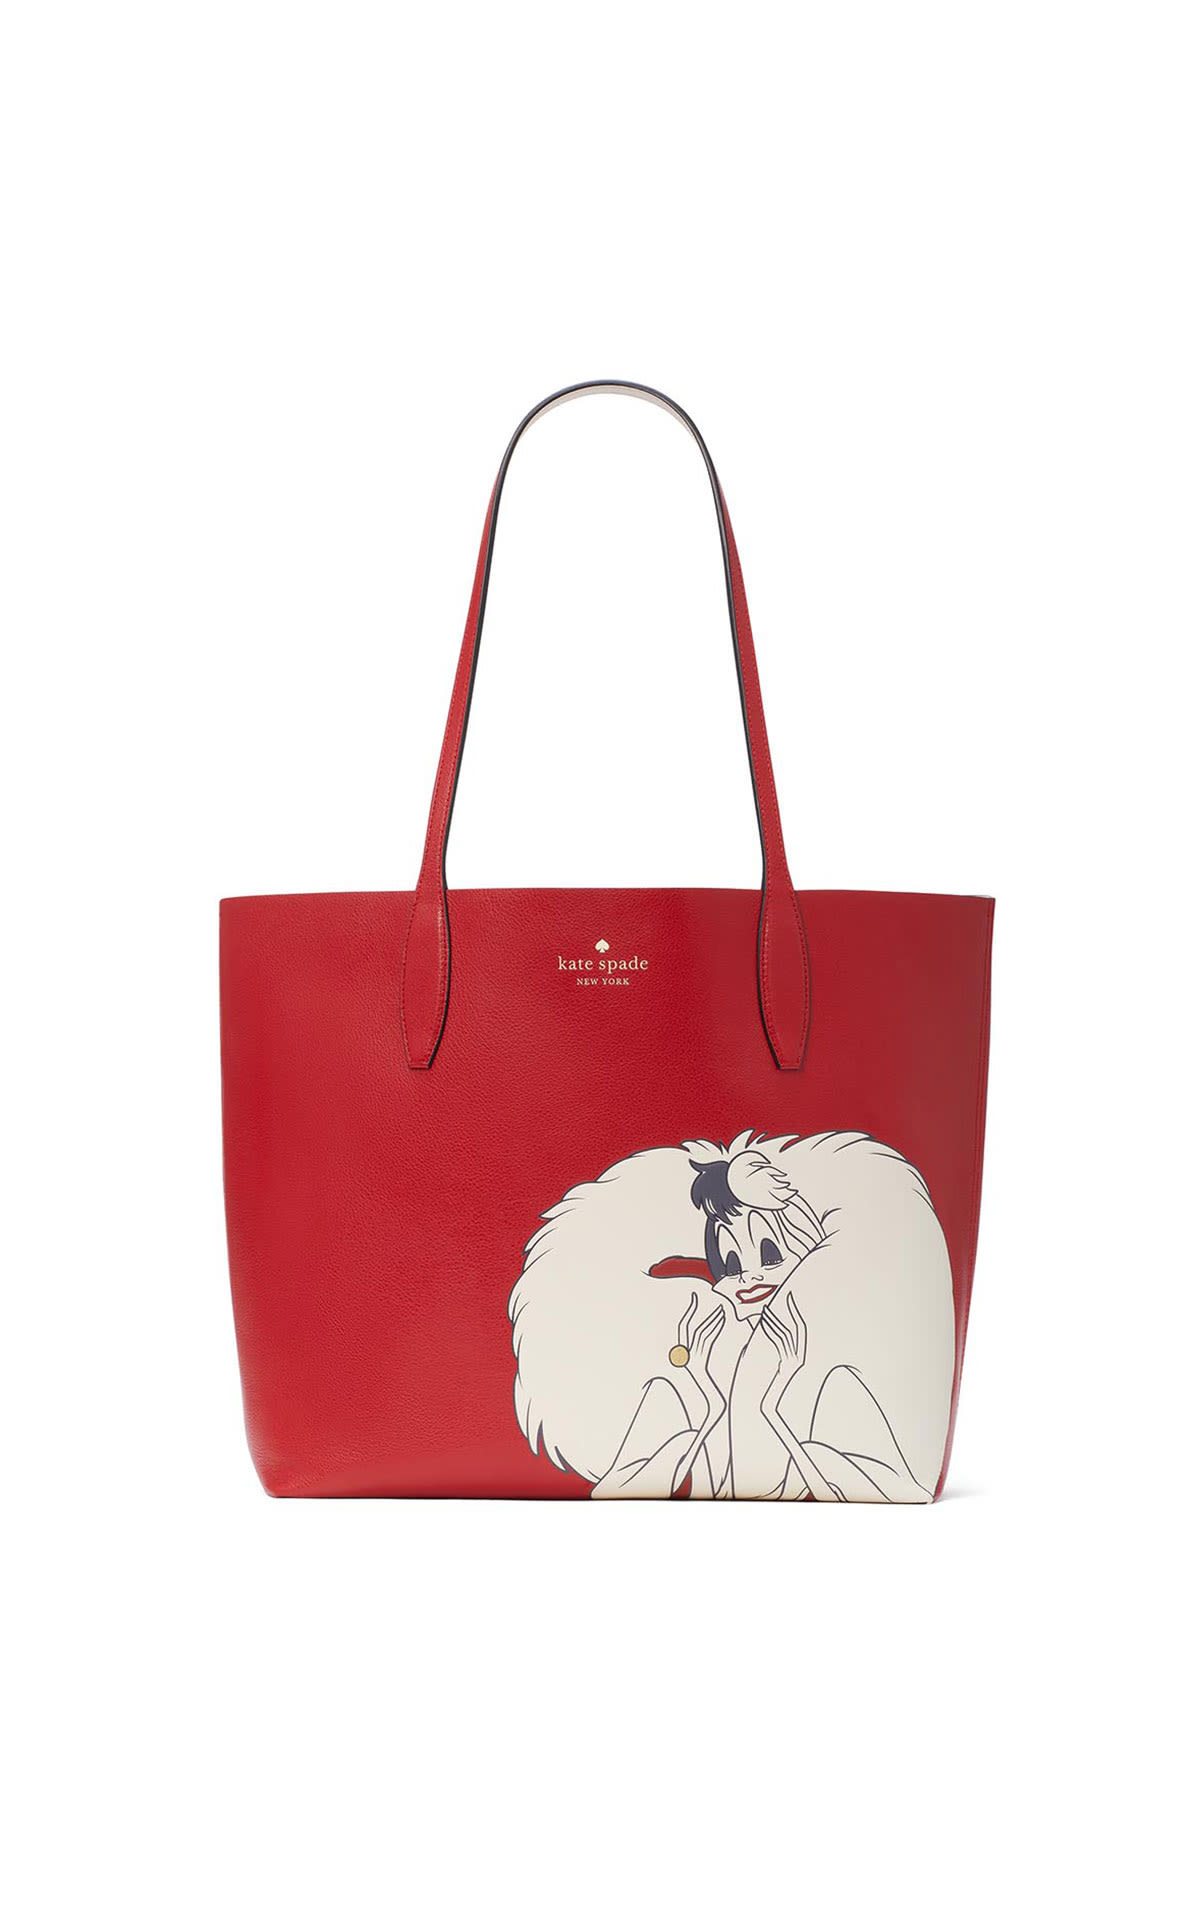 Kate Spade Disney x Kate Spade New York 101 Dalmatians tote from Bicester Village